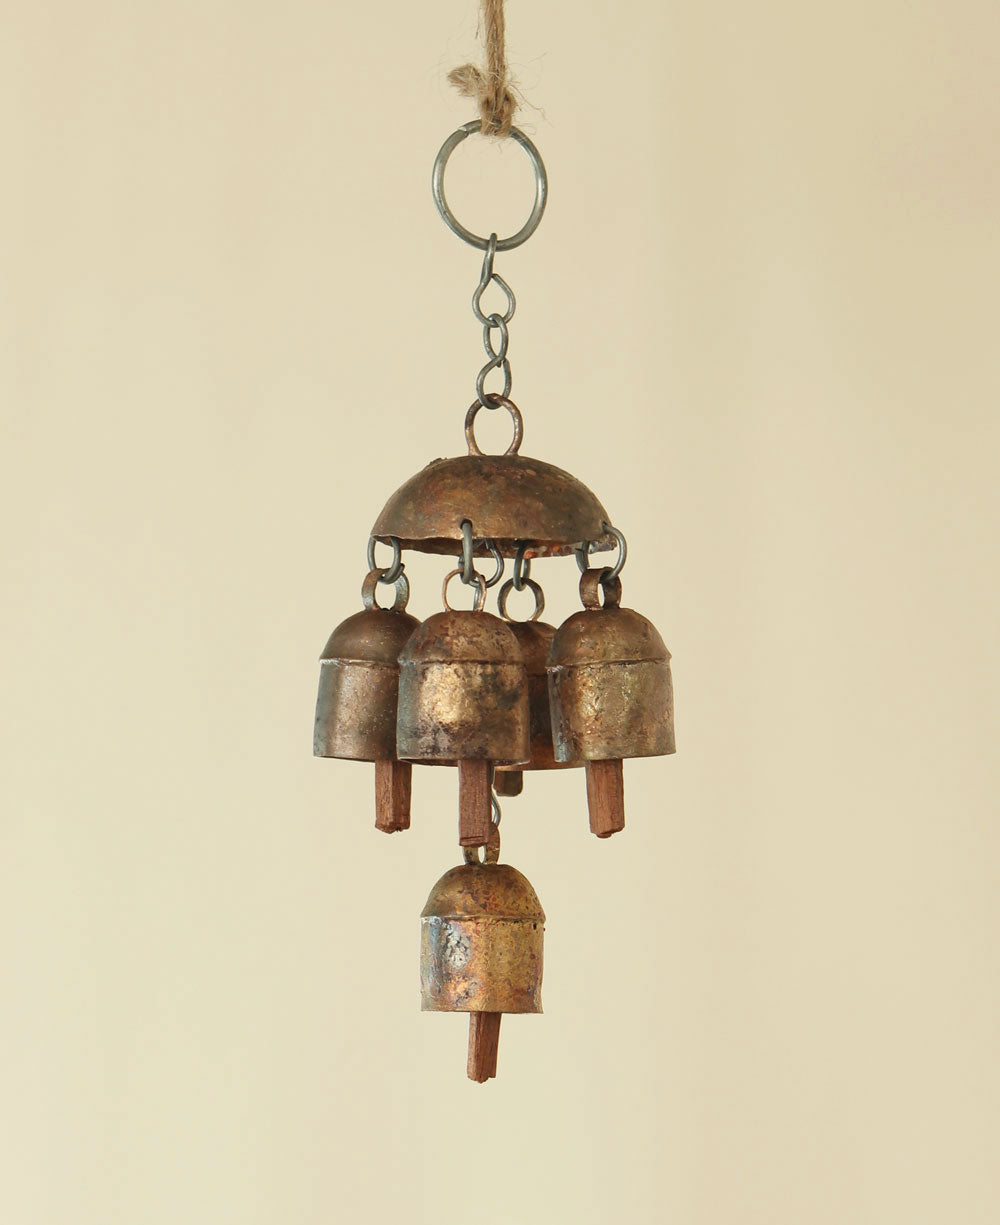 Handmade Indian Bells Vintage Bells for Crafts Recycled Iron Tin Cow Bells  for Wind Chimes Size 1.75 Inch Height 24 Pieces 